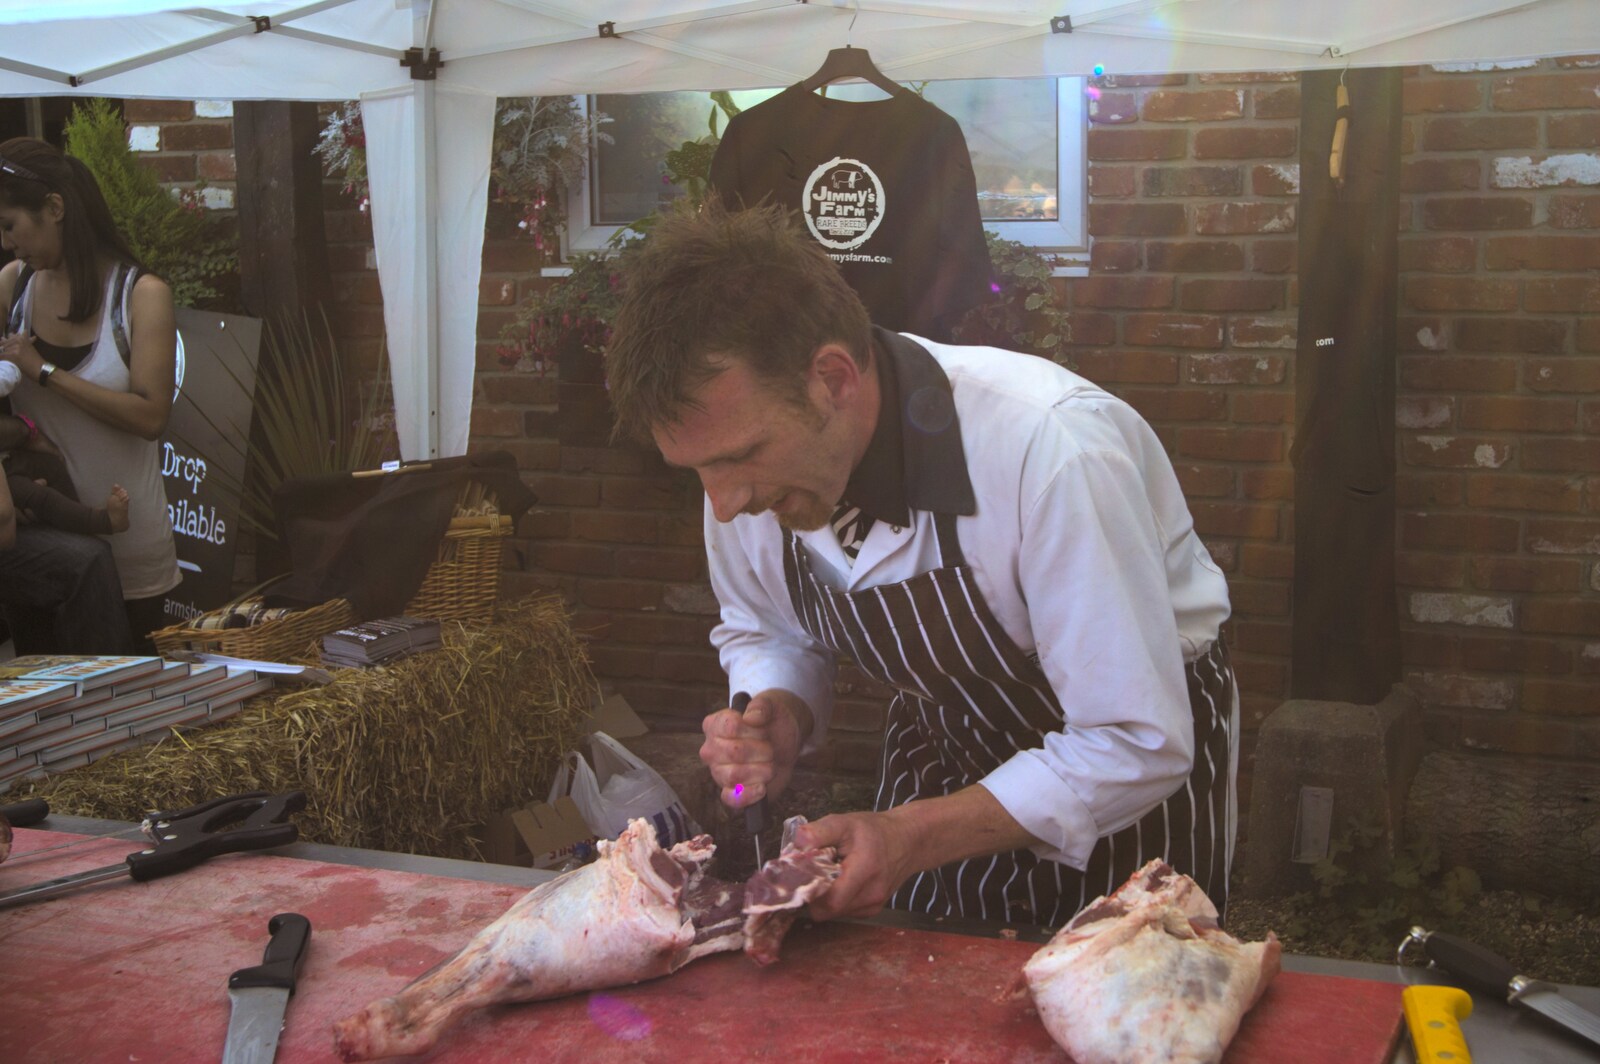 A butcher hacks away at a lamb leg from Harvest Festival at Jimmy's Farm, Wherstead, Suffolk - 12th September 2009